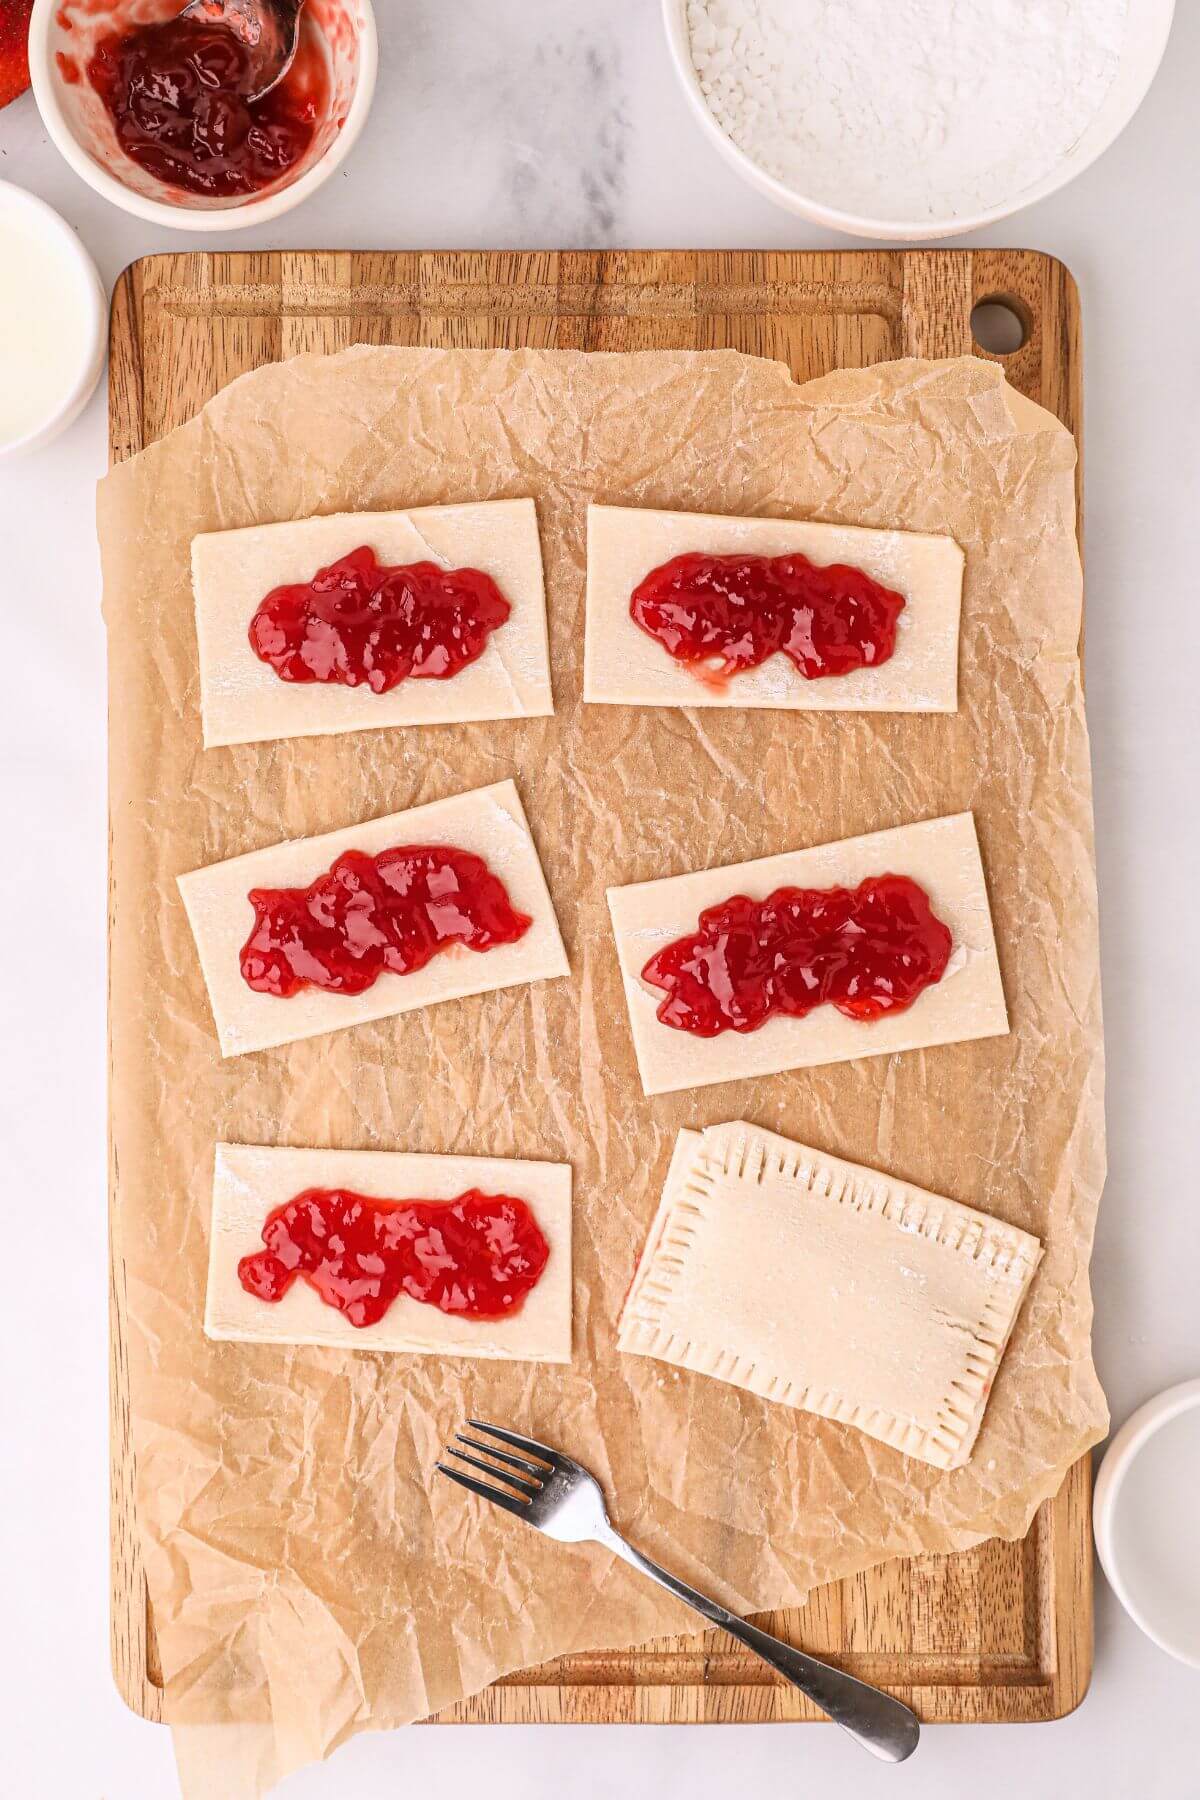 Rectangles of pastries on a wooden cutting board topped with jam.